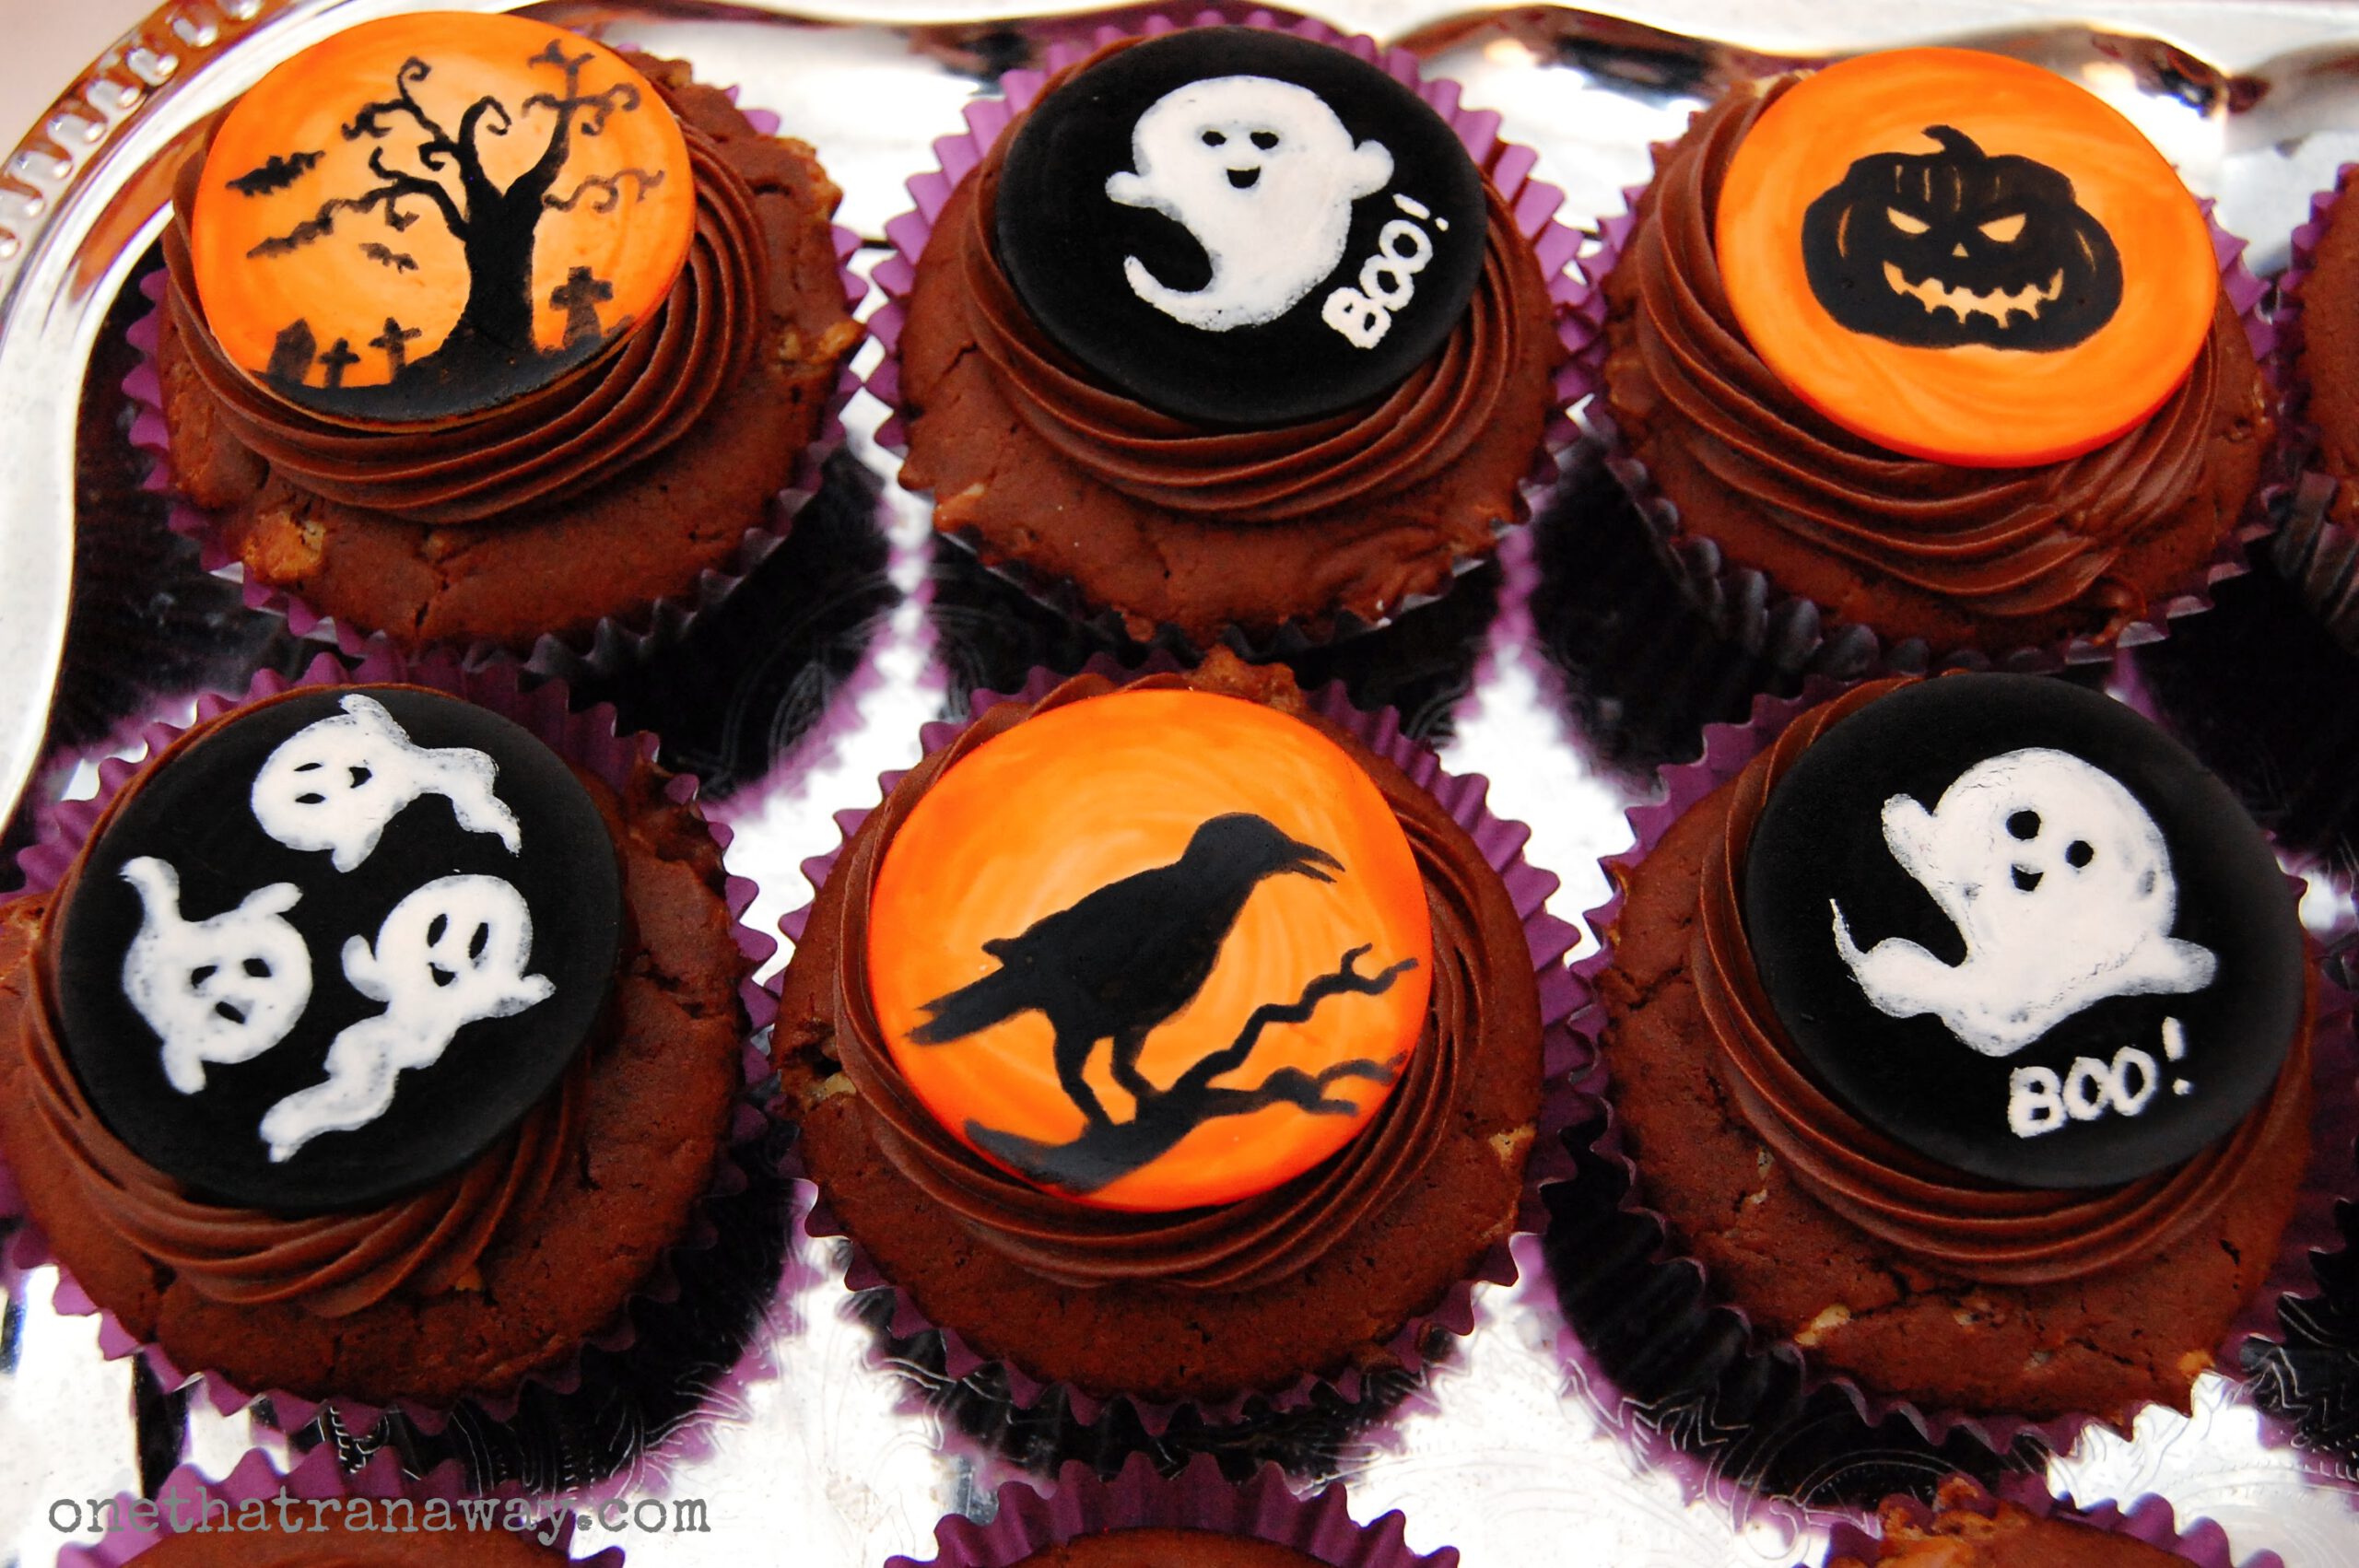 chocolate cupcakes with orange fondant toppers showing Halloween themed silhouettes on silver background